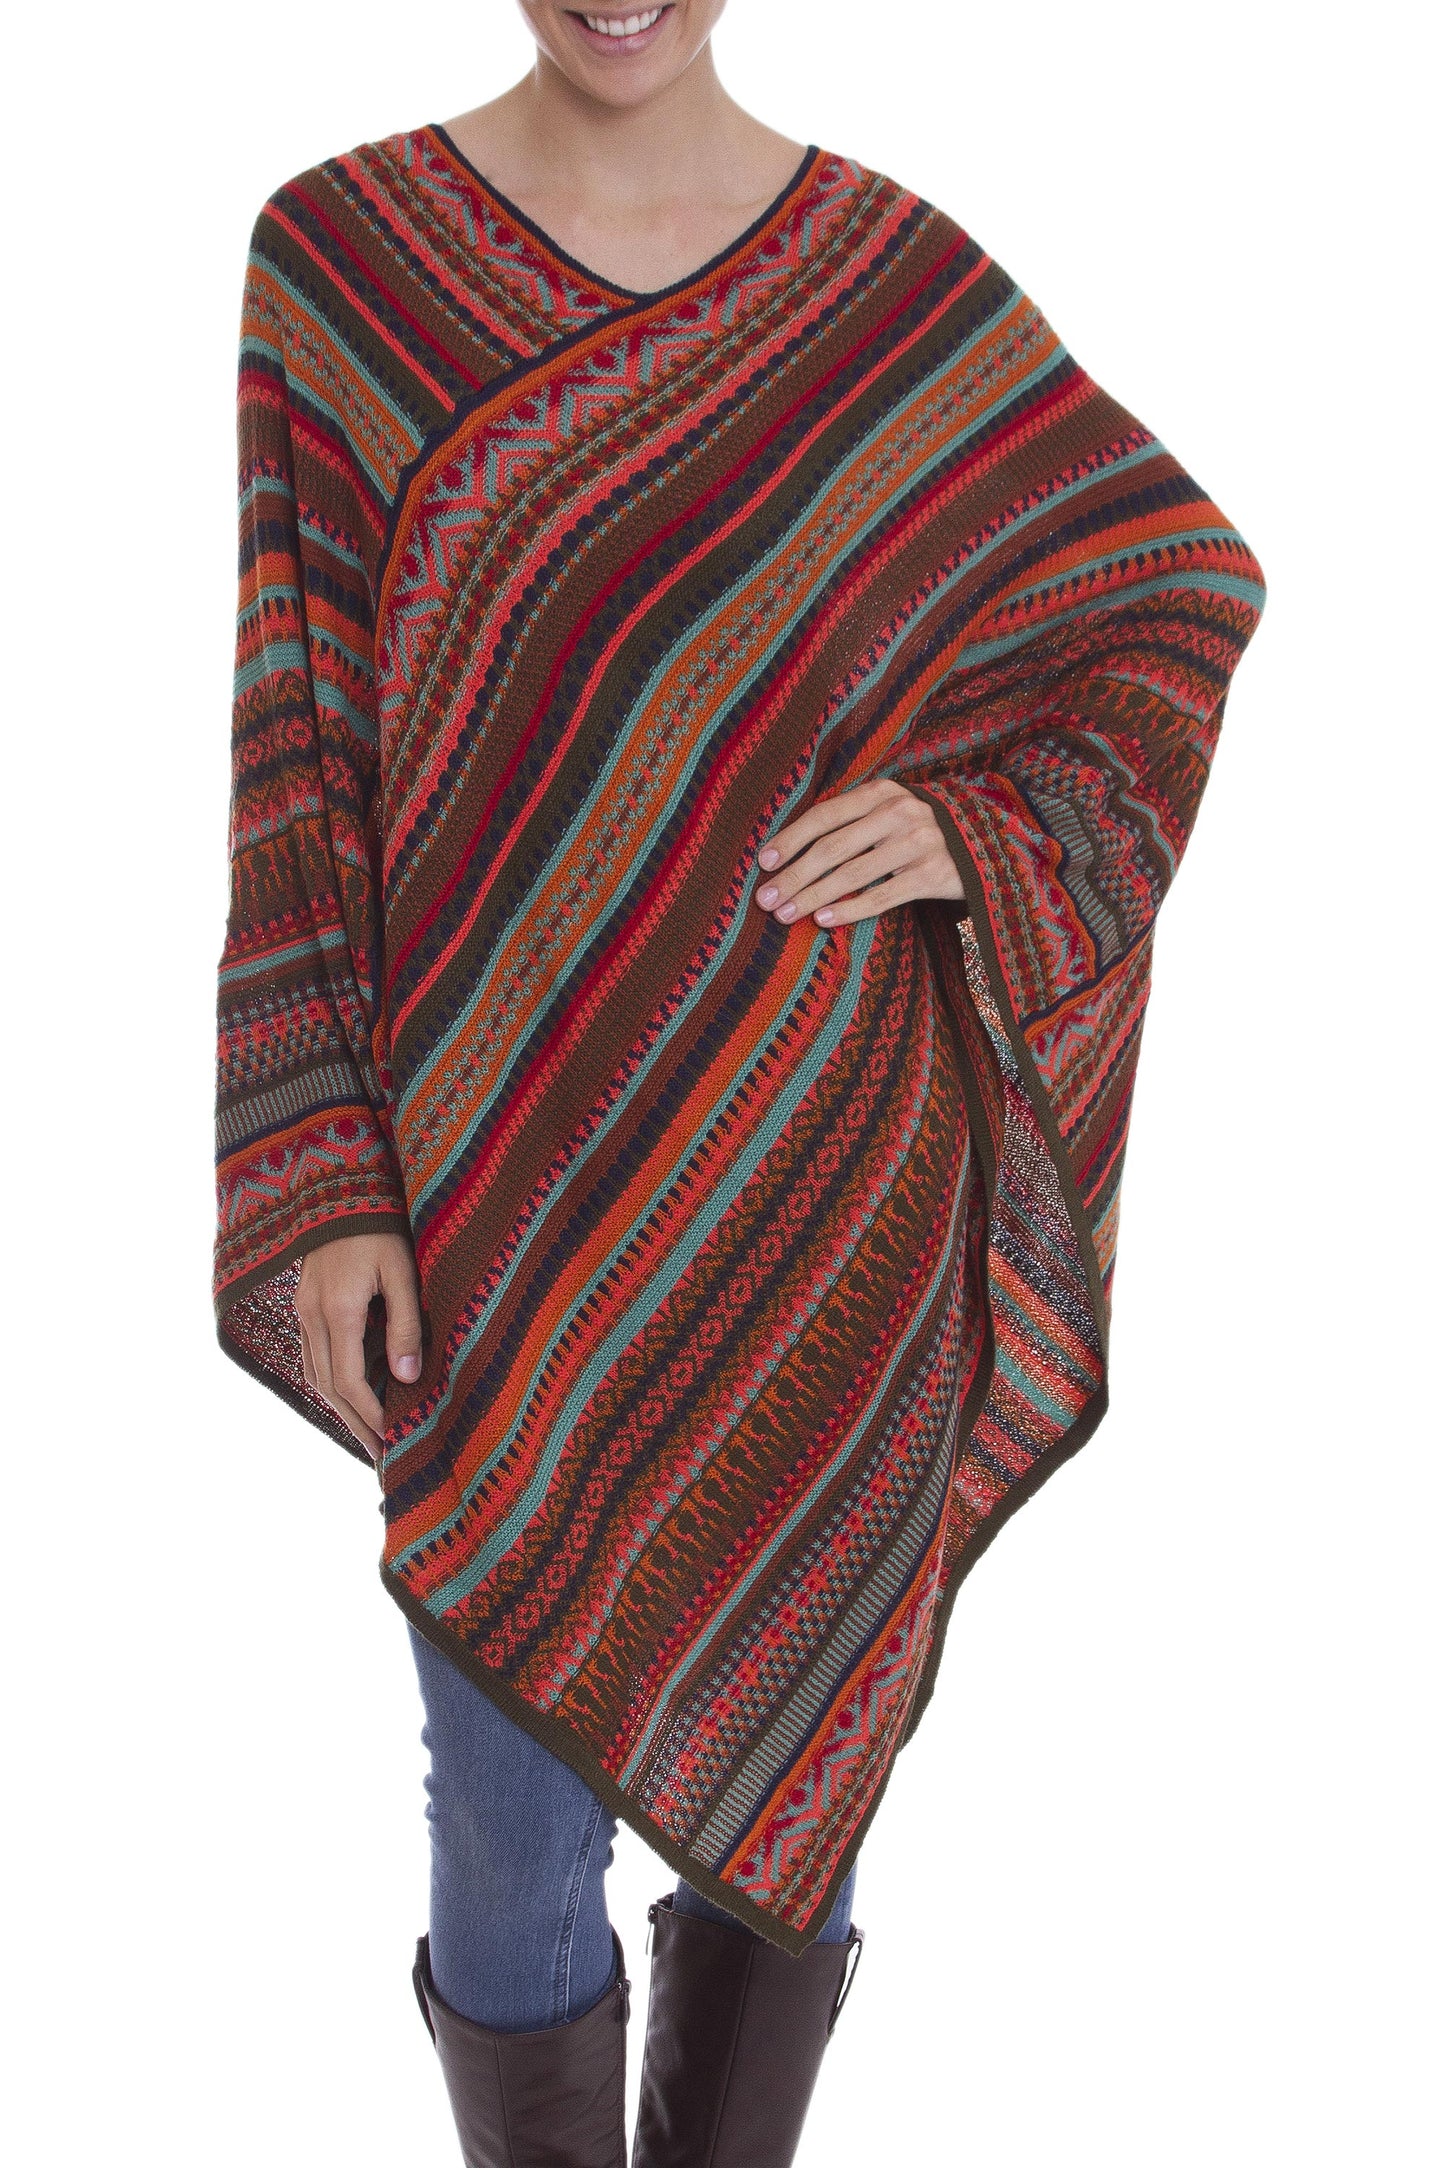 Rivers of Red Red and Multi-Color Striped Acrylic Knit Poncho